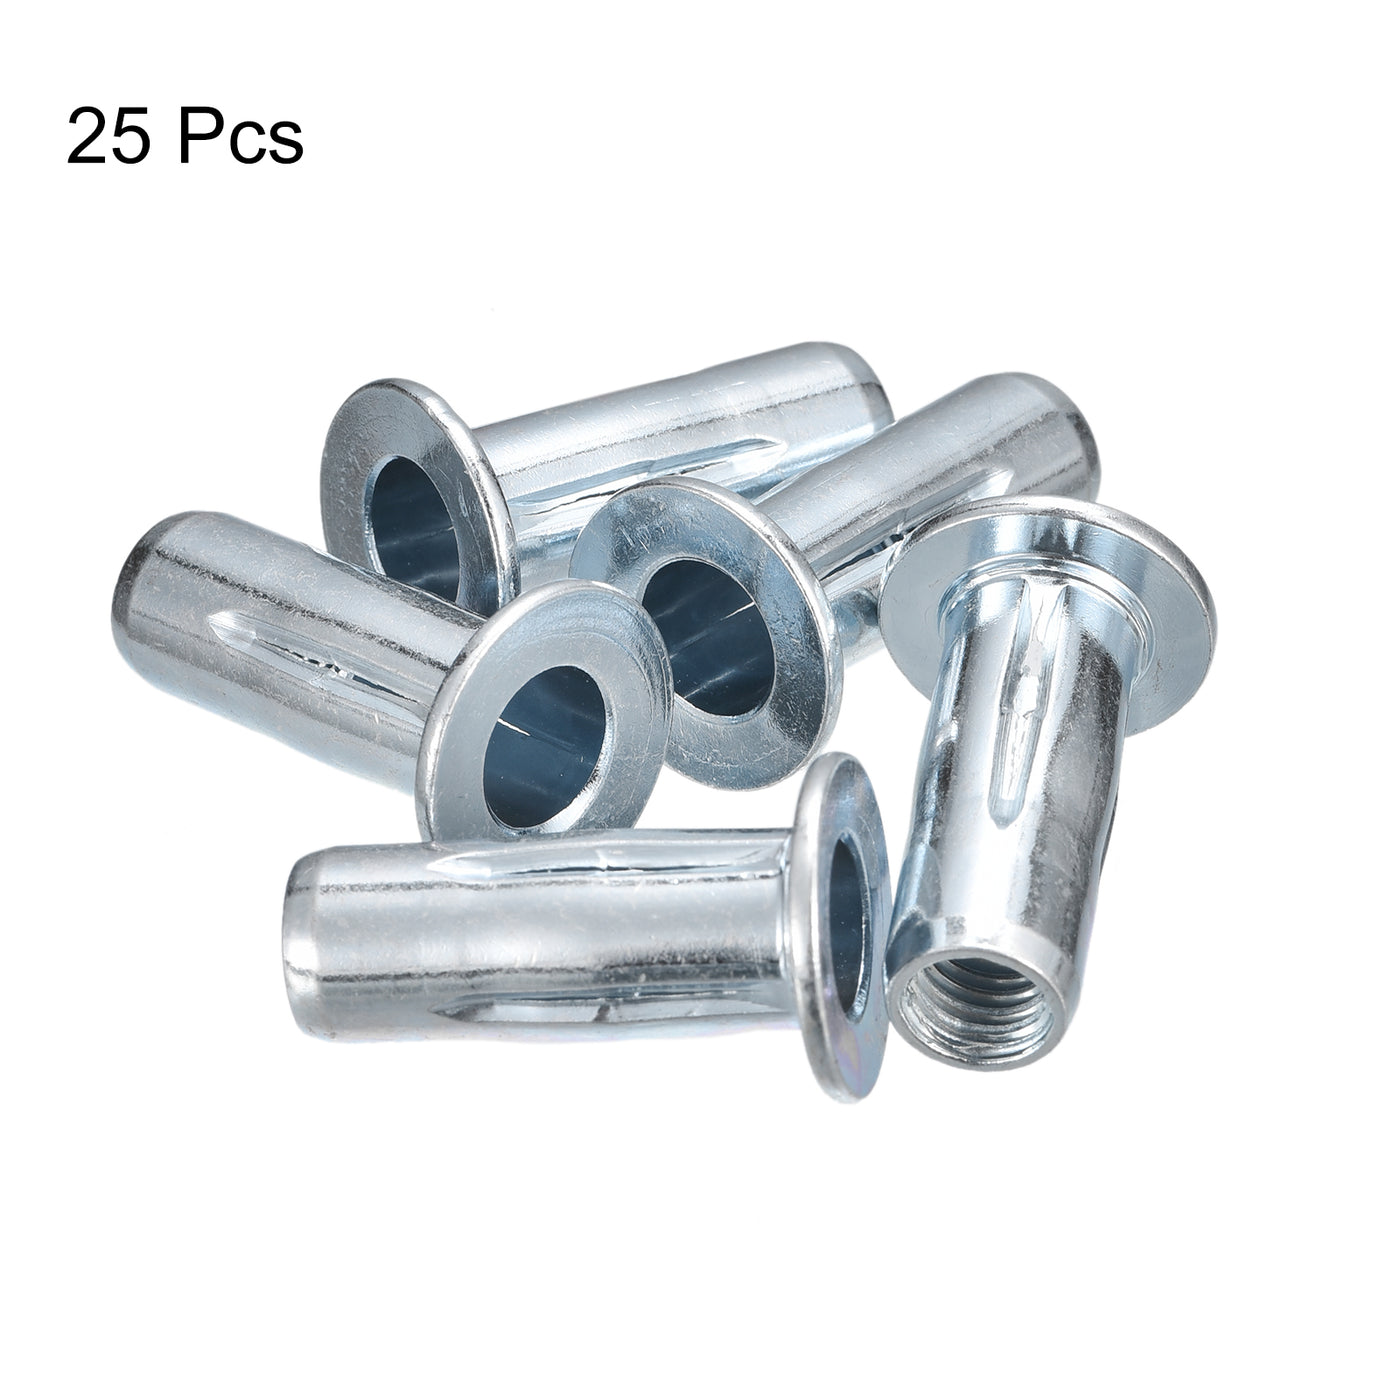 uxcell Uxcell Multi-Grip Rivet Nuts, Pre-Bulbed Shank Flat Head Threaded Insert Nut Carbon Steel Plus Nuts